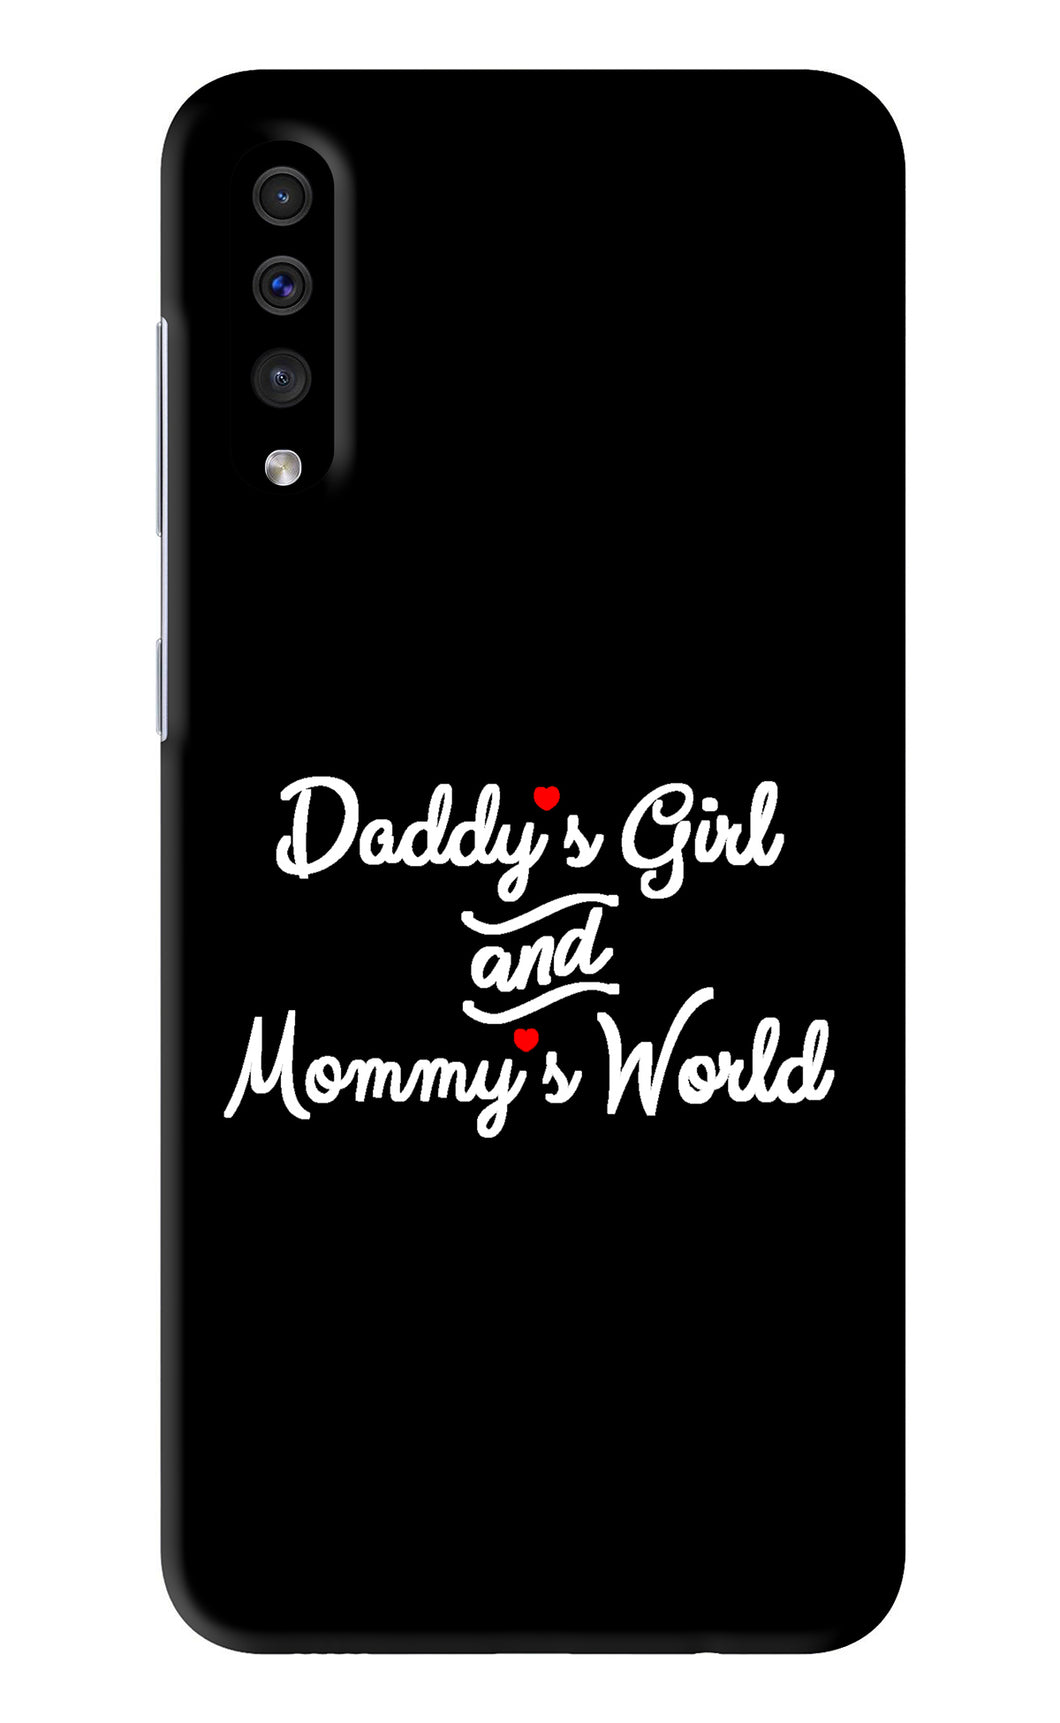 Daddy's Girl and Mommy's World Samsung Galaxy A50 Back Skin Wrap